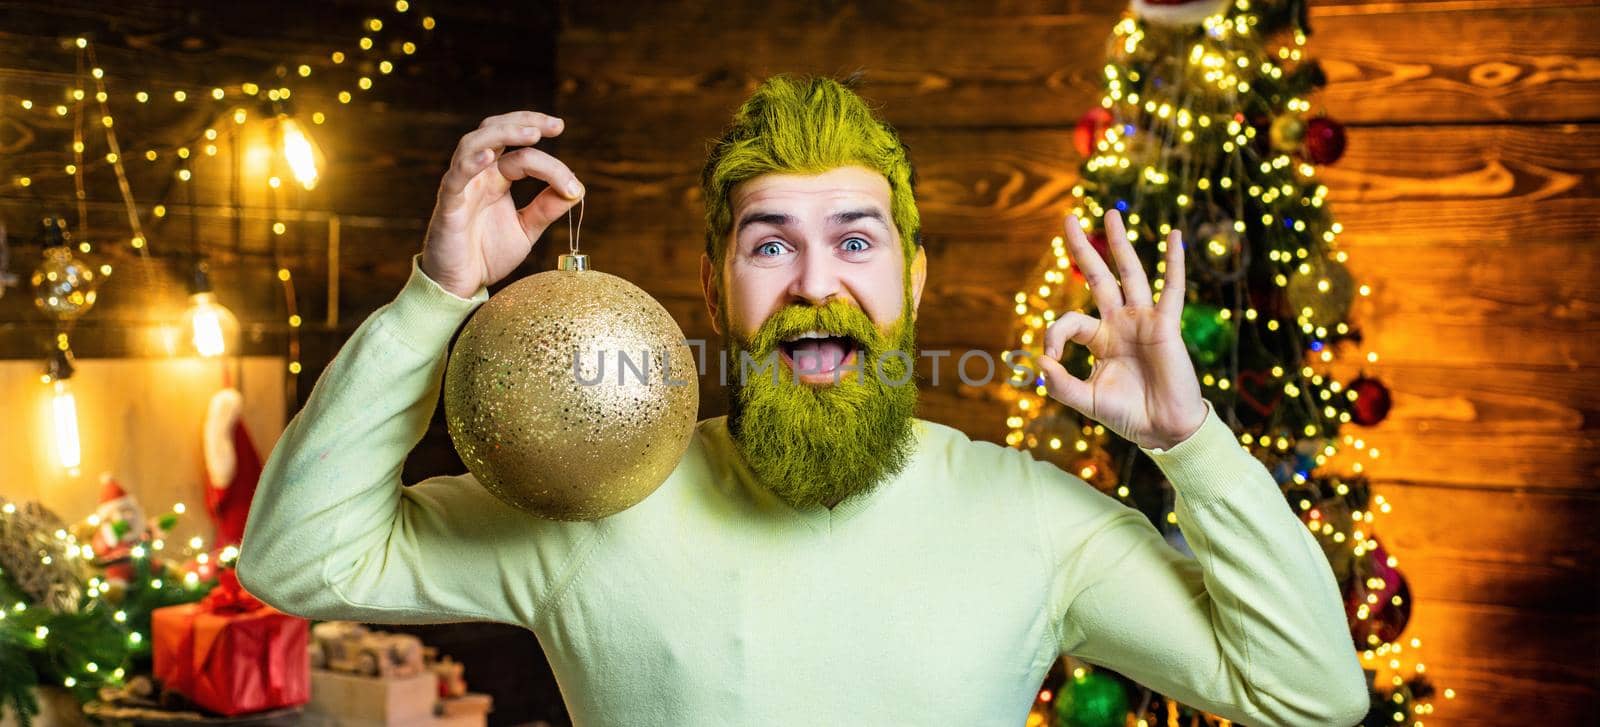 Santa man with a white beard posing on the Christmas wooden background